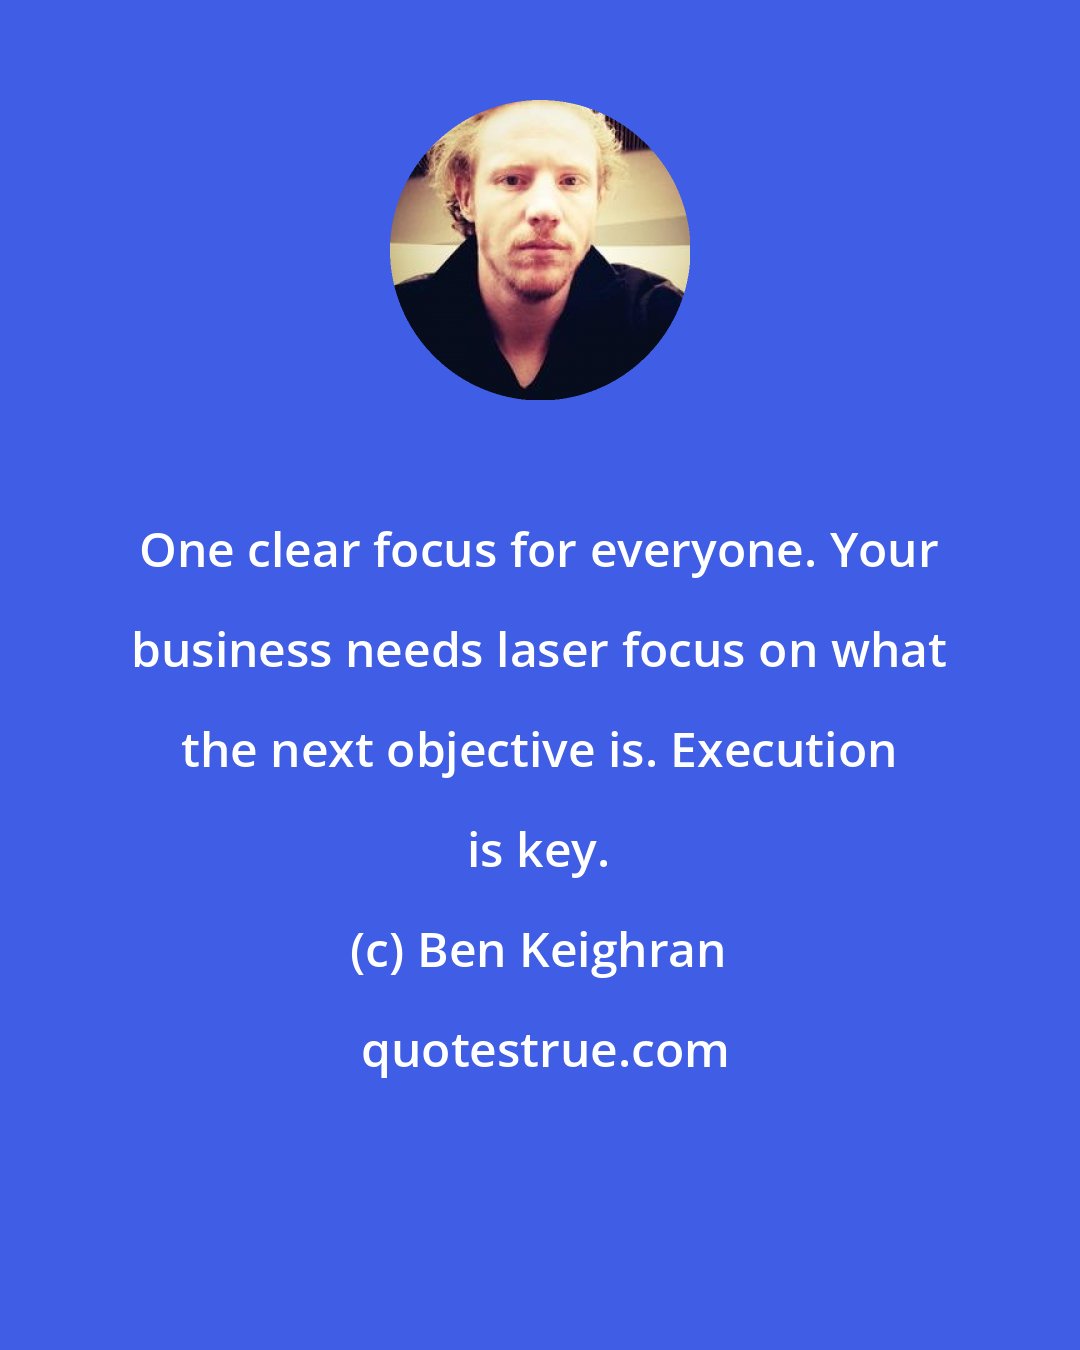 Ben Keighran: One clear focus for everyone. Your business needs laser focus on what the next objective is. Execution is key.